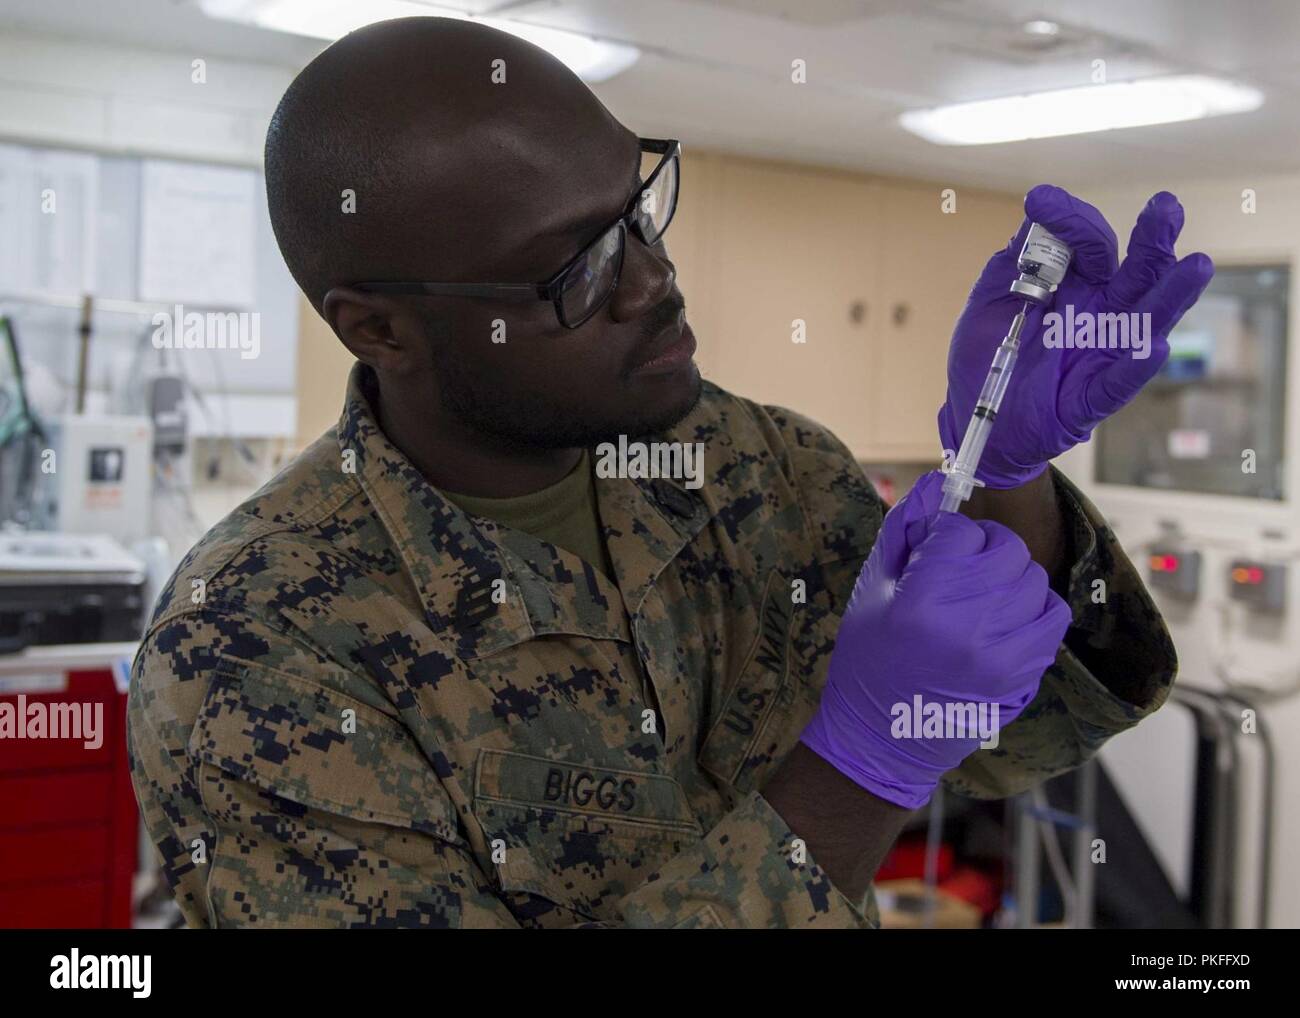 PACIFIC OCEAN (July 26, 2018) Hospitalman Javaugh Biggs, from St. Andrew, Jamaica, assigned to Battalion Landing Team 3/1, prepares a medical syringe in the medical ward of San Antonio-class amphibious transport dock USS Anchorage (LPD 23) during a regularly scheduled deployment of Essex Amphibious Ready Group (ARG) and 13th Marine Expeditionary Unit (MEU). The Essex ARG/MEU team is a strong and flexible force equipped and scalable to respond to any crisis ranging from humanitarian assistance and disaster relief to contingency operations. Stock Photo